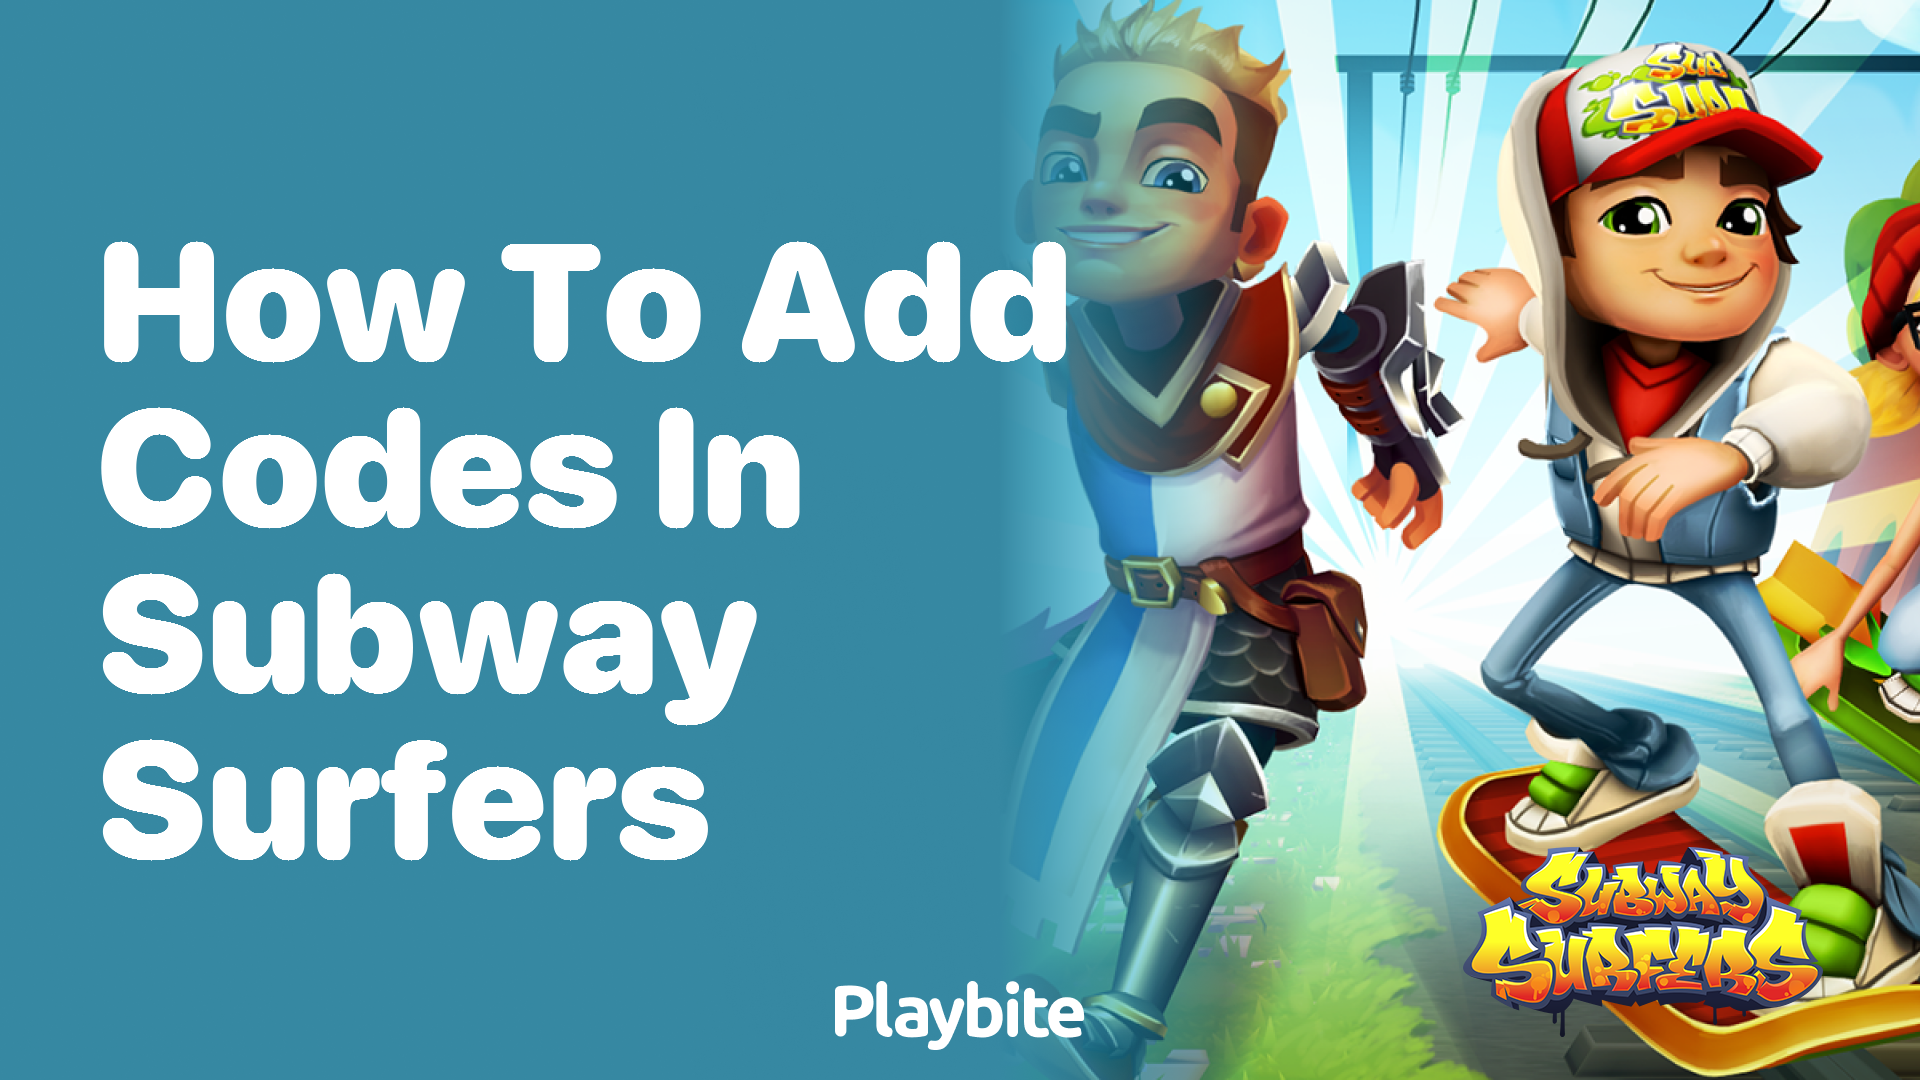 How to Add Codes in Subway Surfers